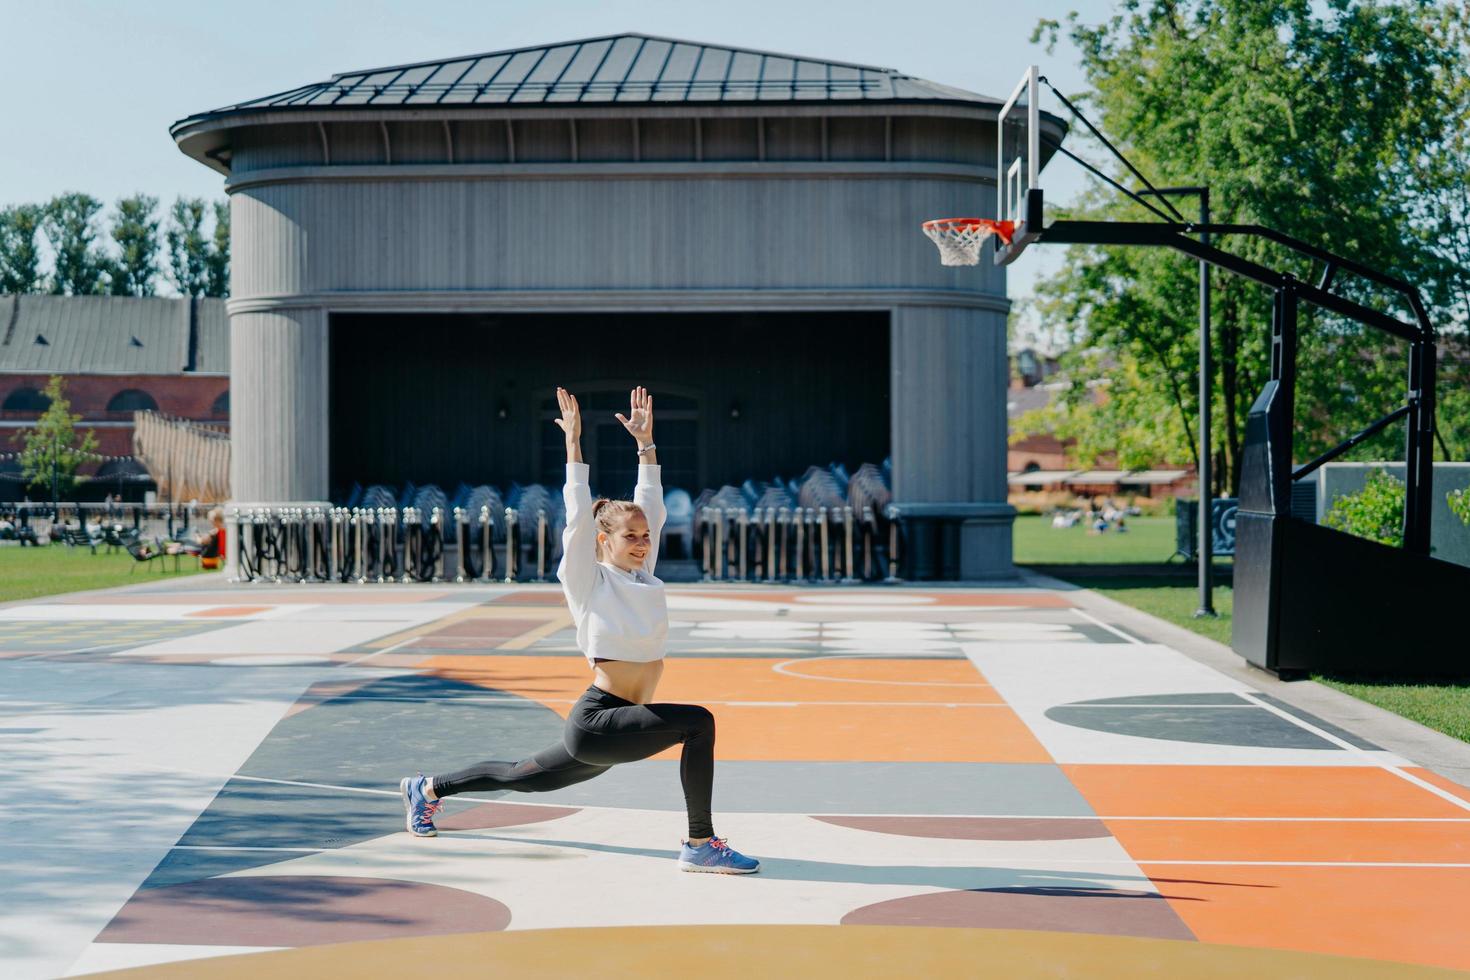 Personal workout routine. Athletic woman does physical exercises outdoor keeps arms raised up warms up before jogging dressed in active wear poses on basketball court. Flexibility and fitness photo